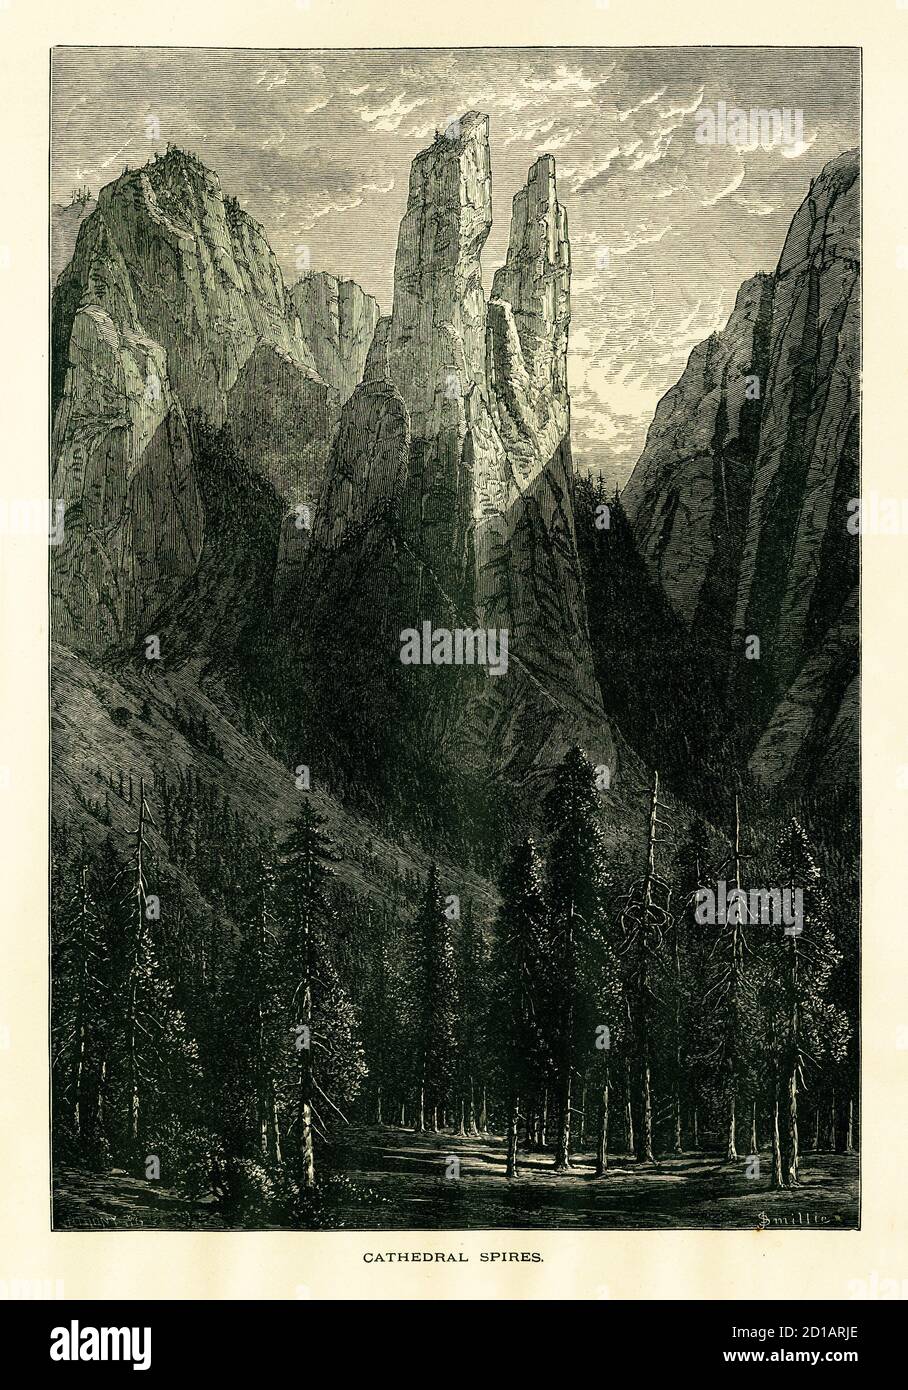 19th-century engraving of Cathedral Spires, pinnacles located on the south side of Yosemite Valley, U.S. state of California. Illustration published i Stock Photo